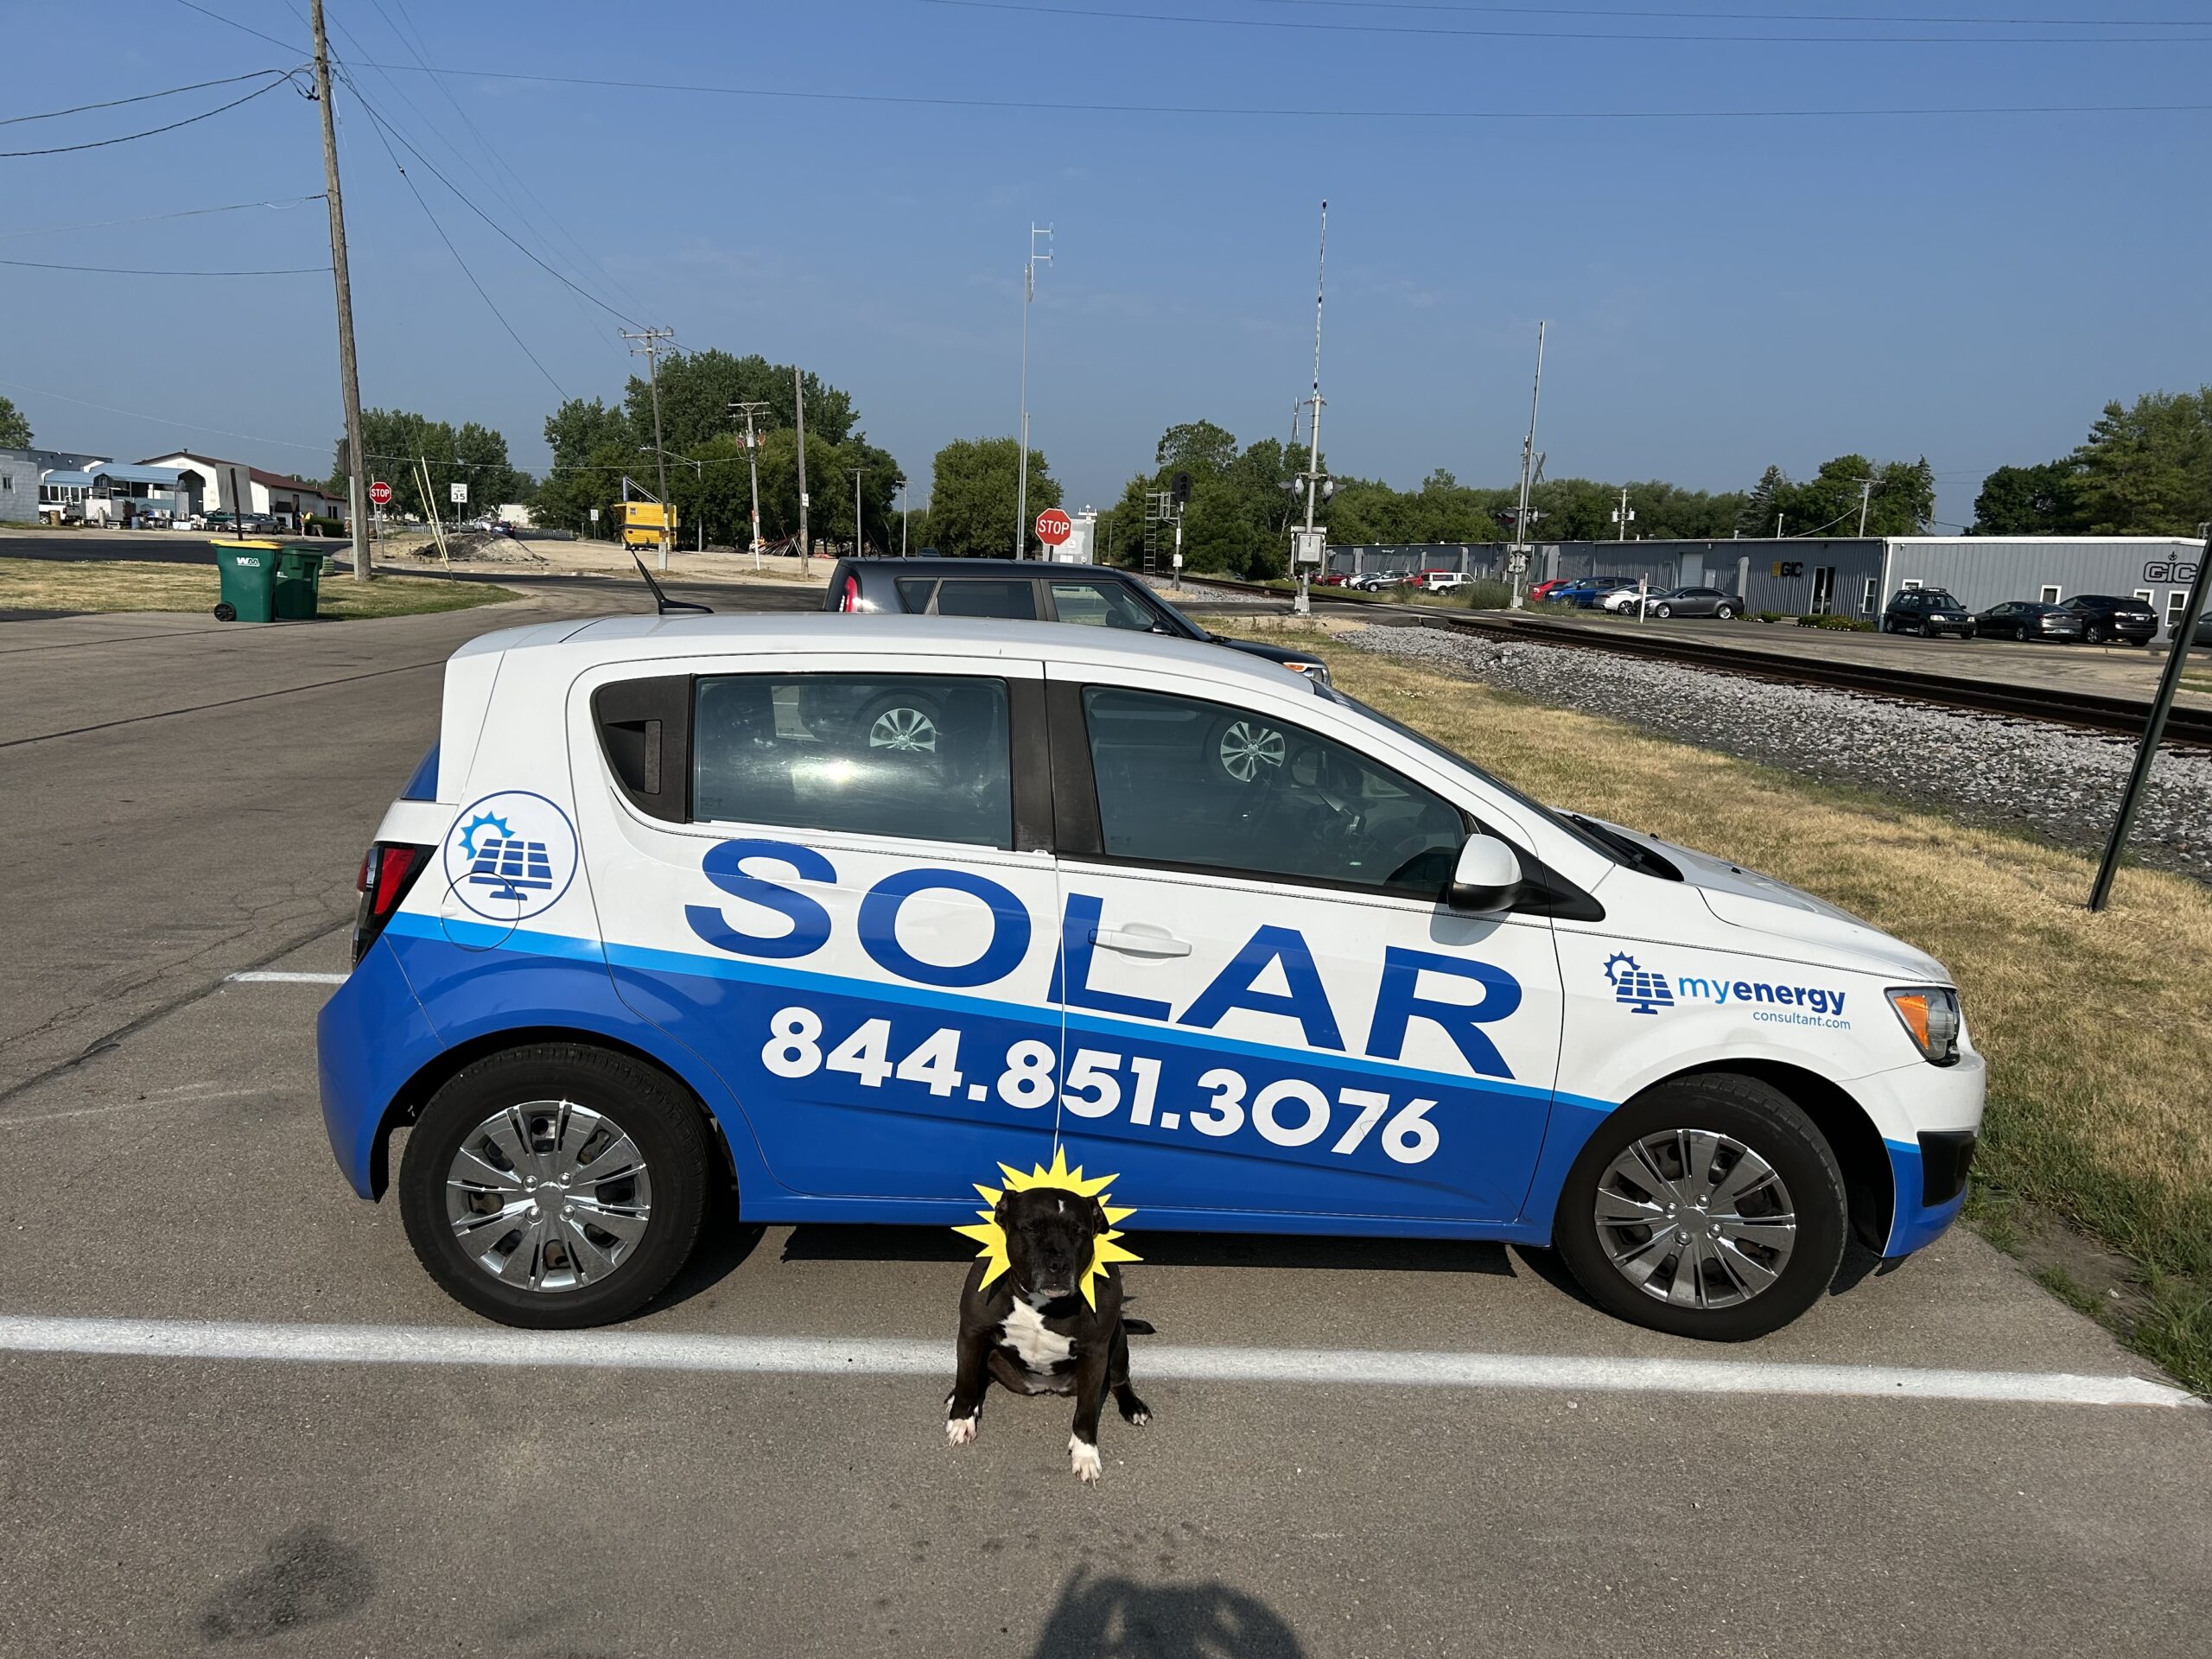 Nelly the sundog next to the myenergyconsultant.com wrapped car